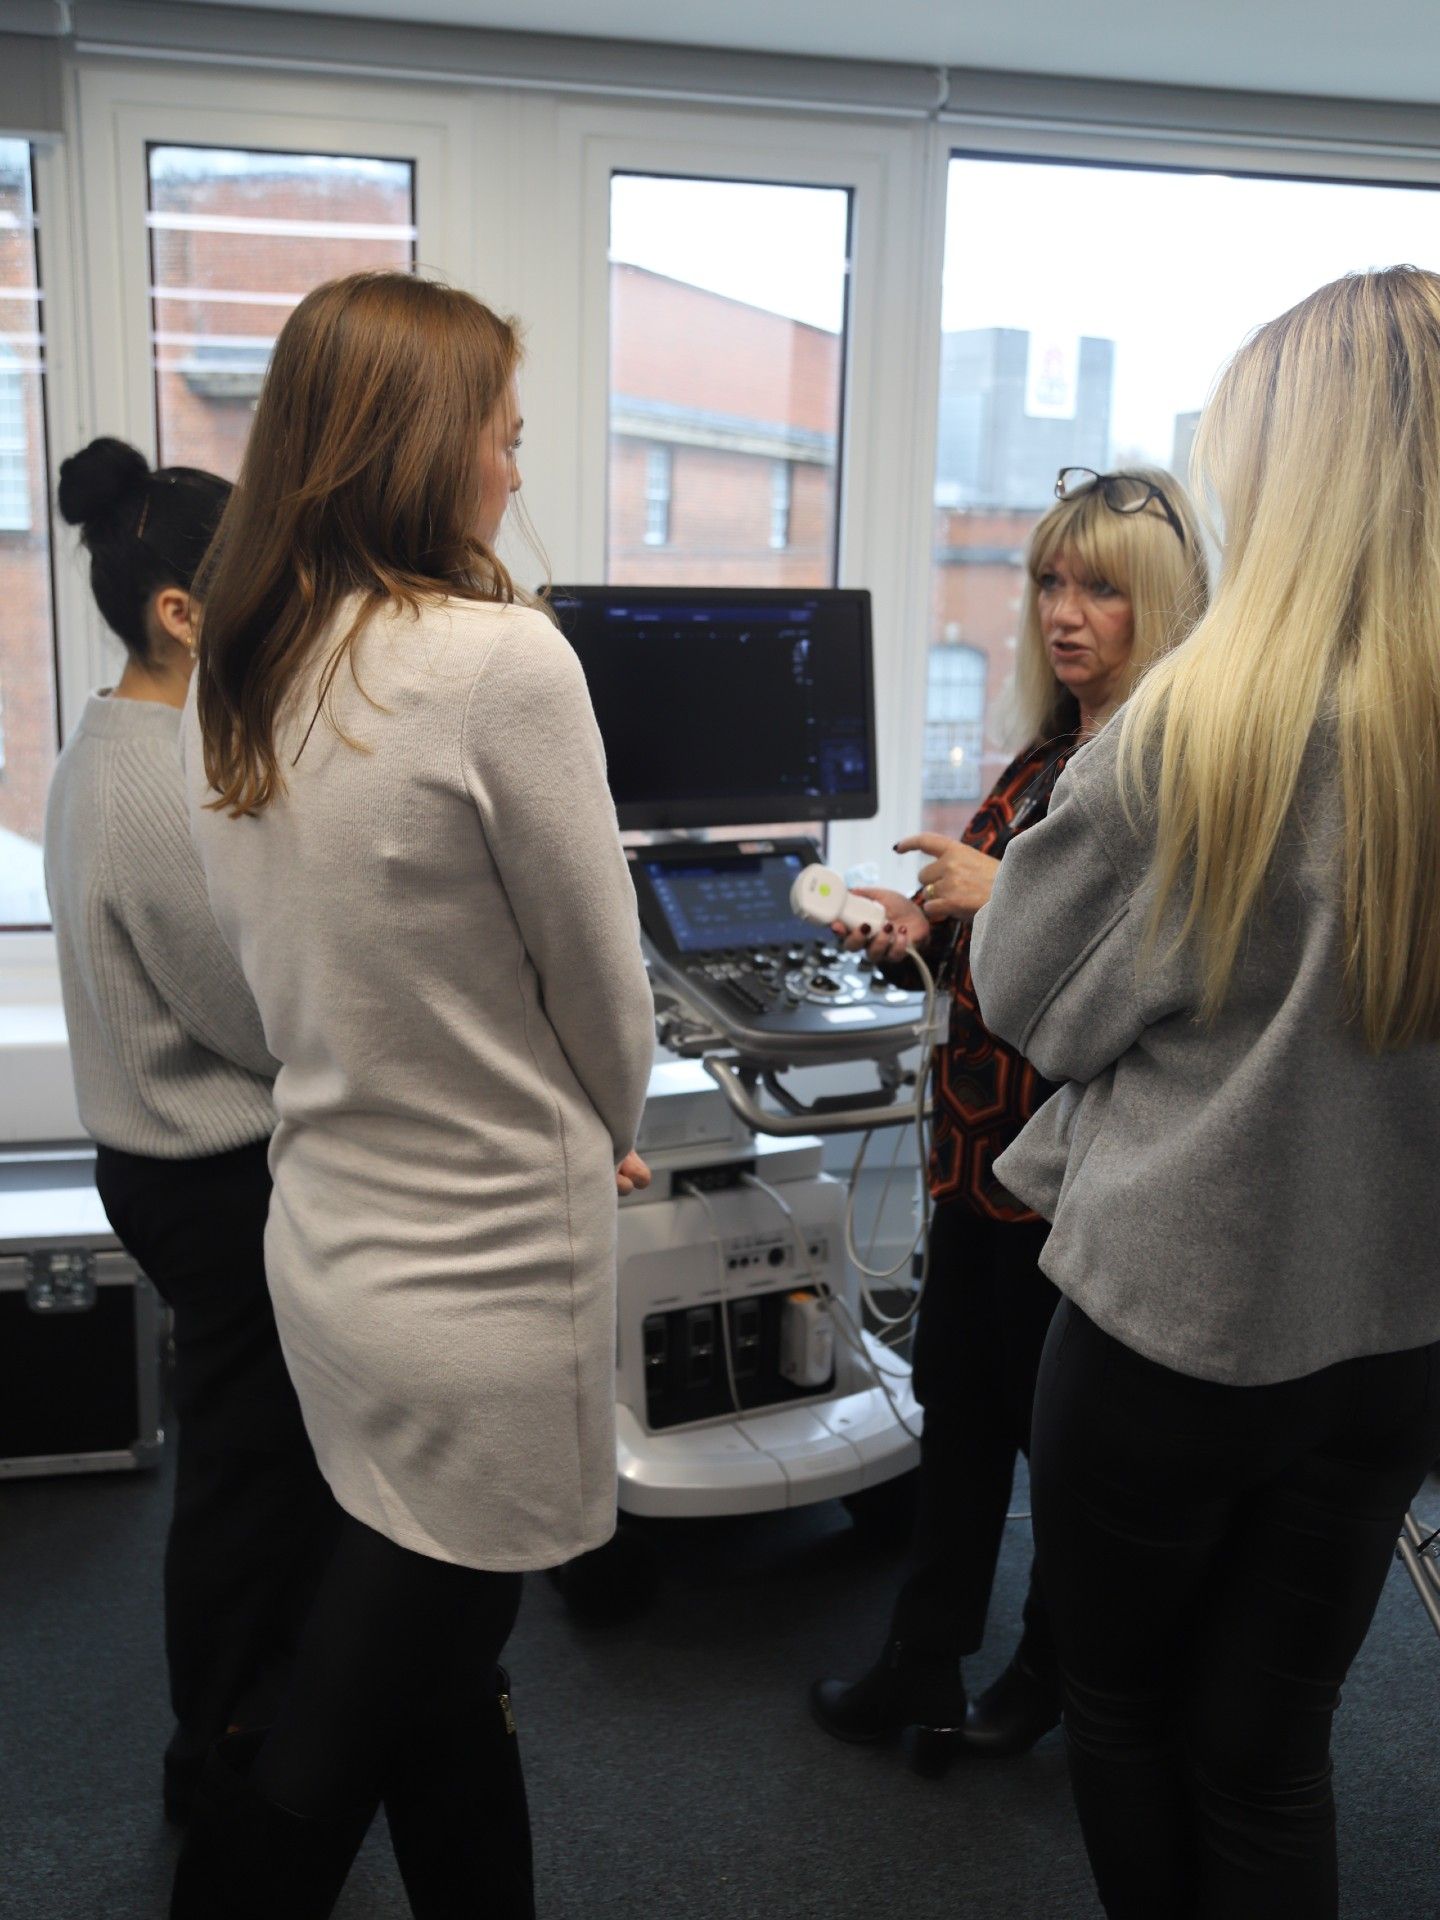 Ultrasound demo with students